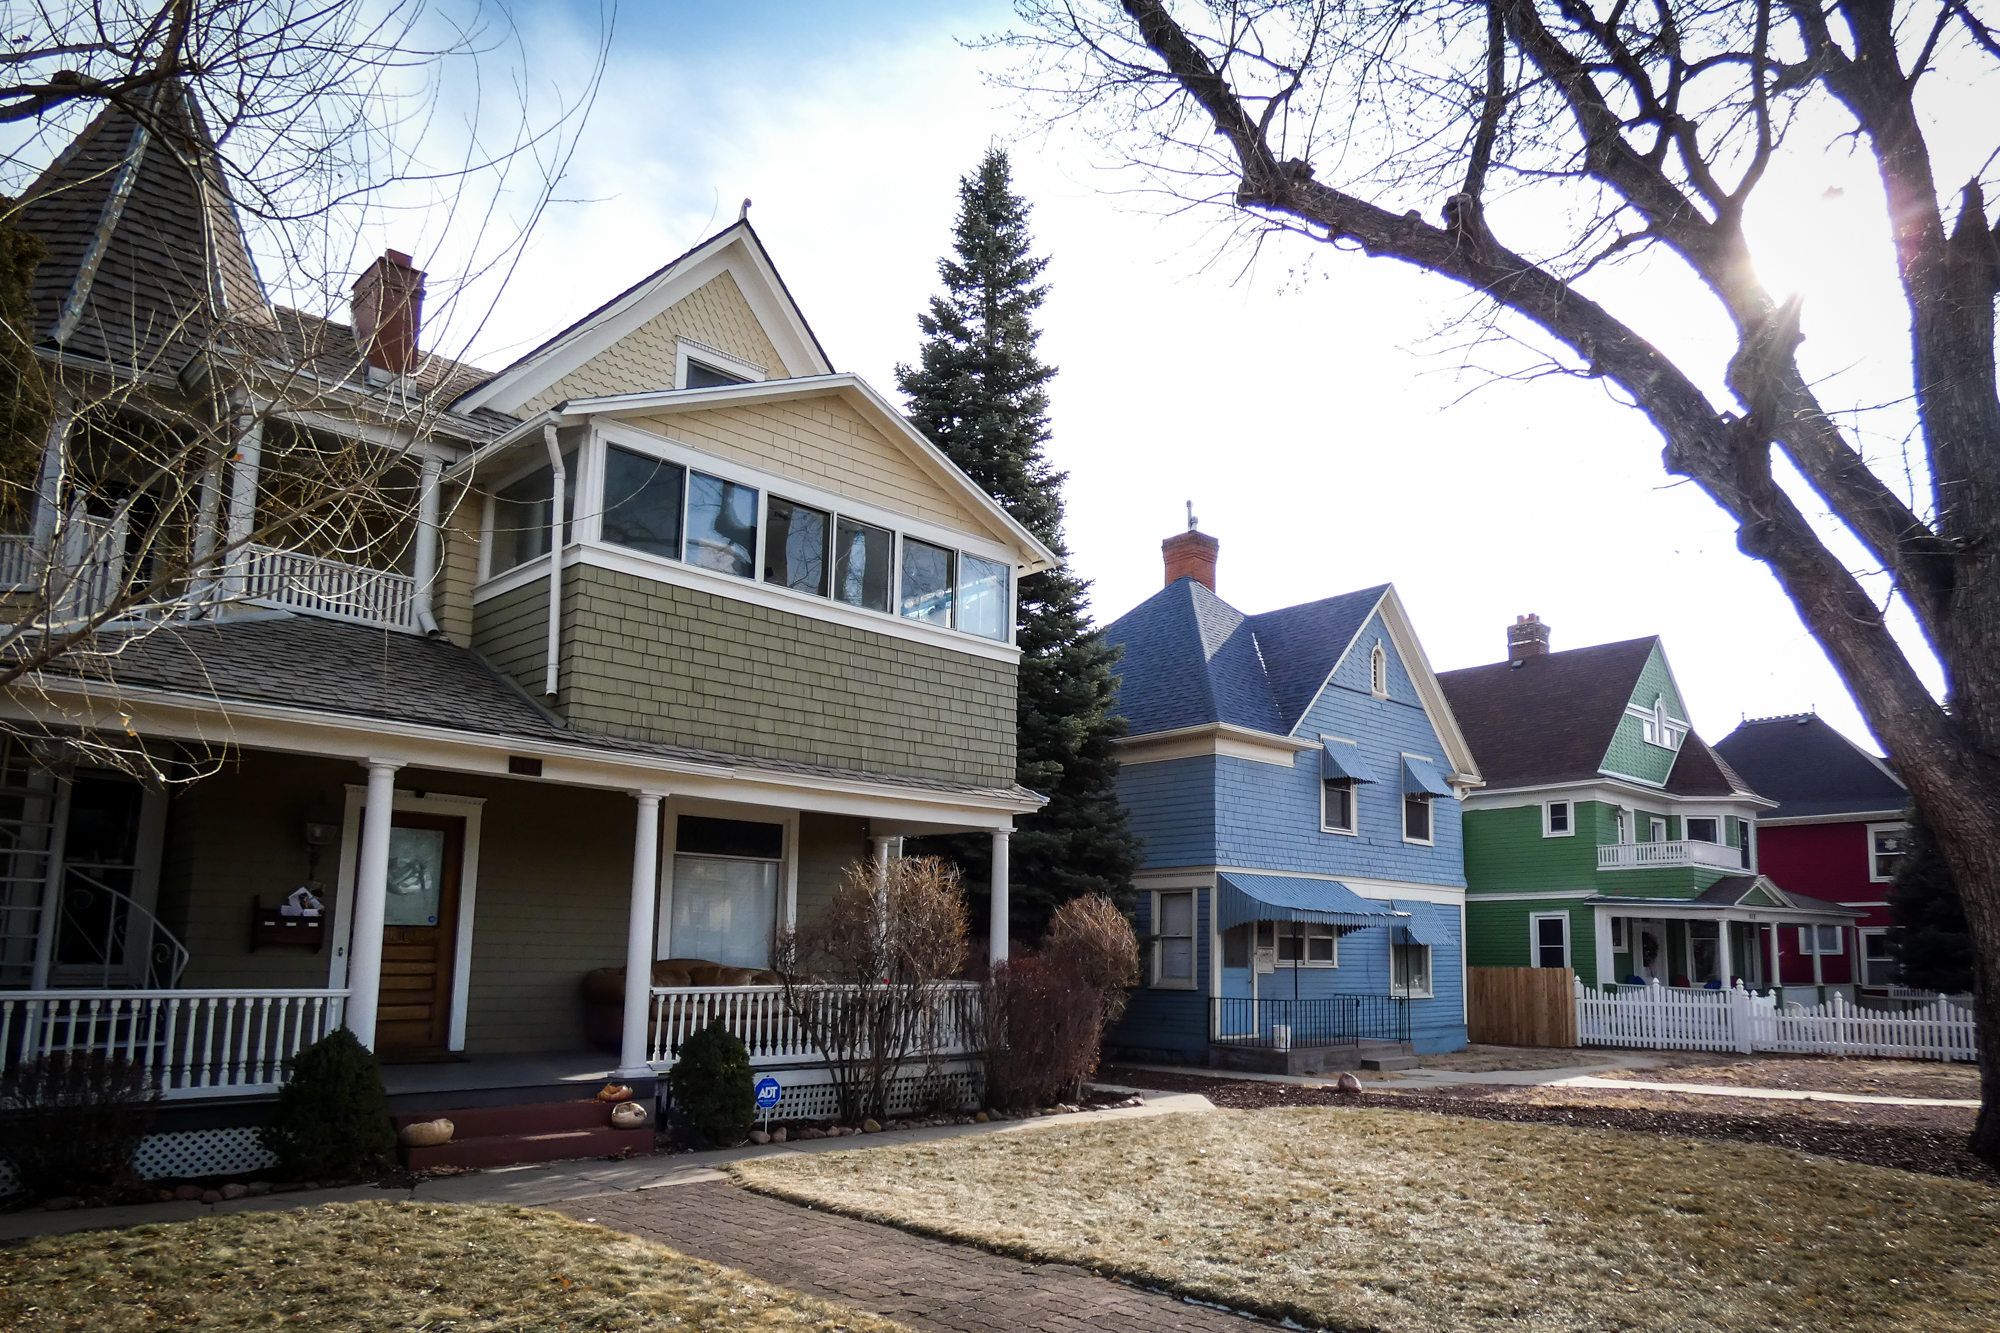 Homes in the older sections of Colorado Springs are often more than a century old like these in the Old North End neighborhood. Not far away in Middle Shook&#039;s Run the homes tend to be smaller.